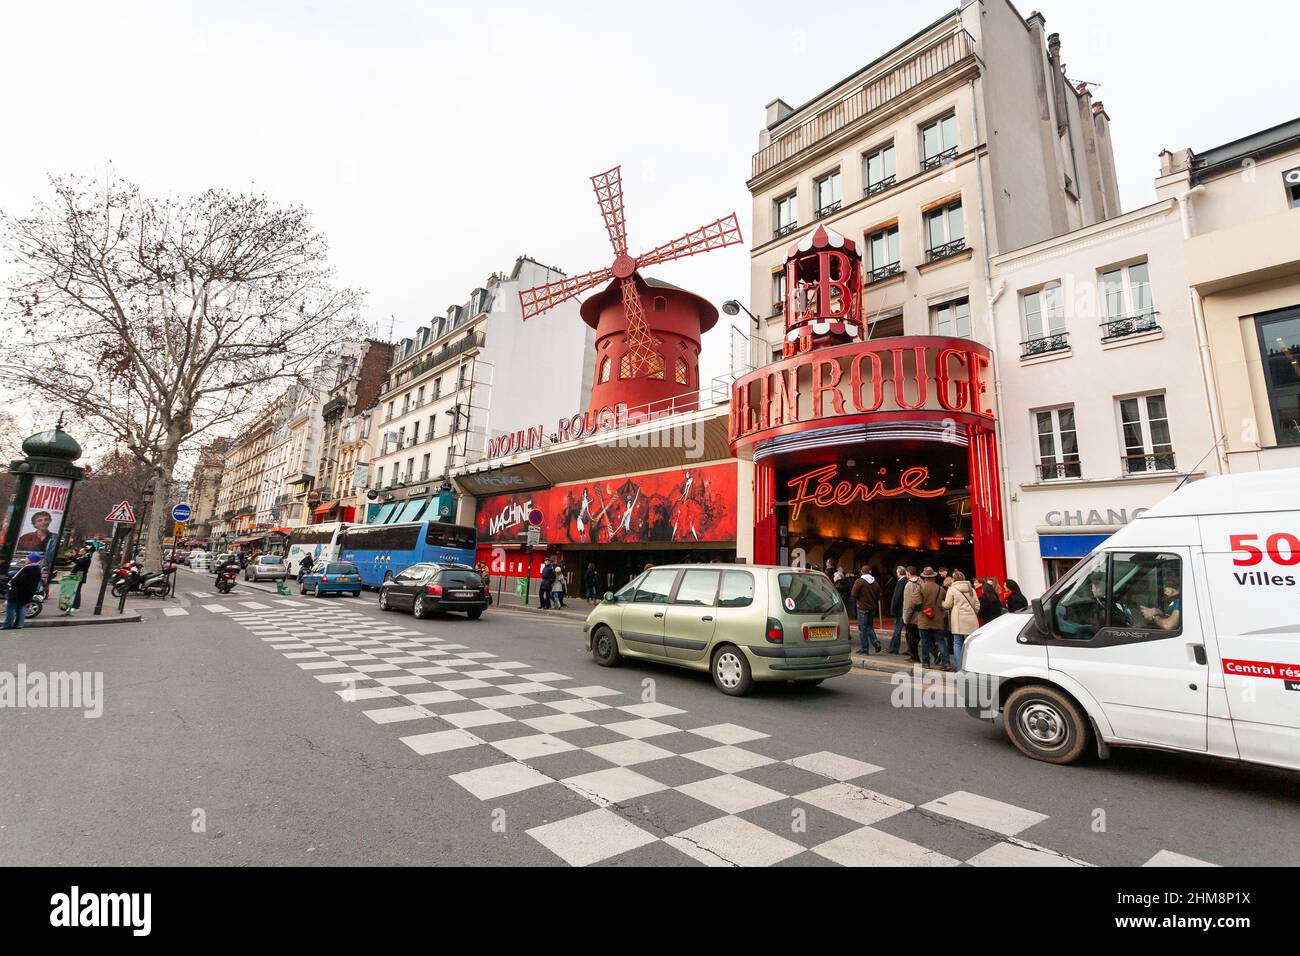 Paris , France - 21 February, 2010: Cabaret Moulin Rouge with red mill in Paris district Montmartre. Stock Photo